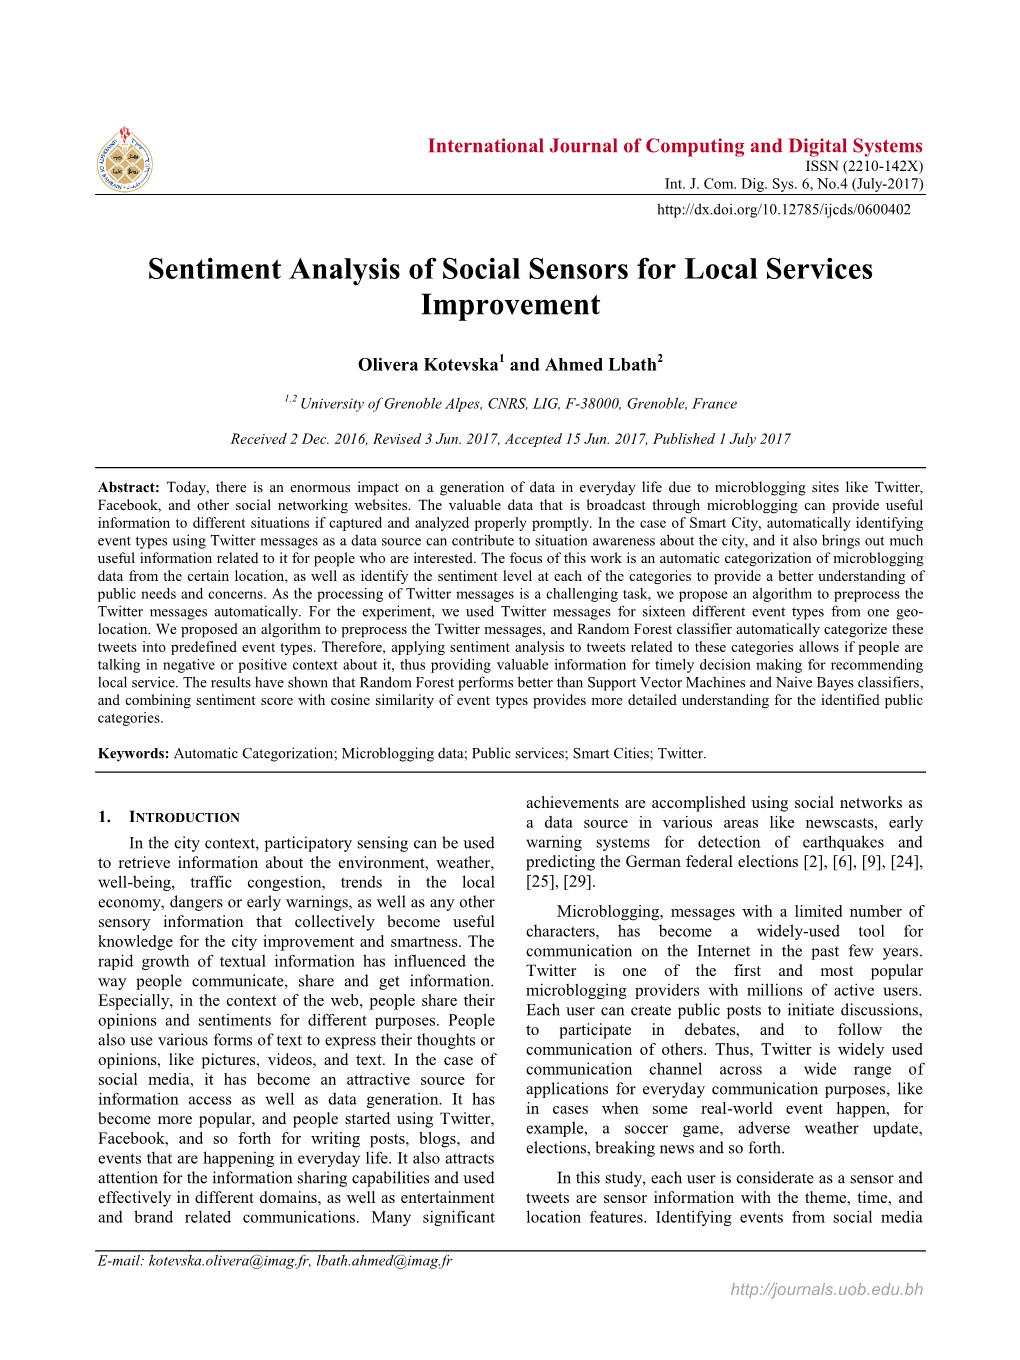 Sentiment Analysis of Social Sensors for Local Services Improvement